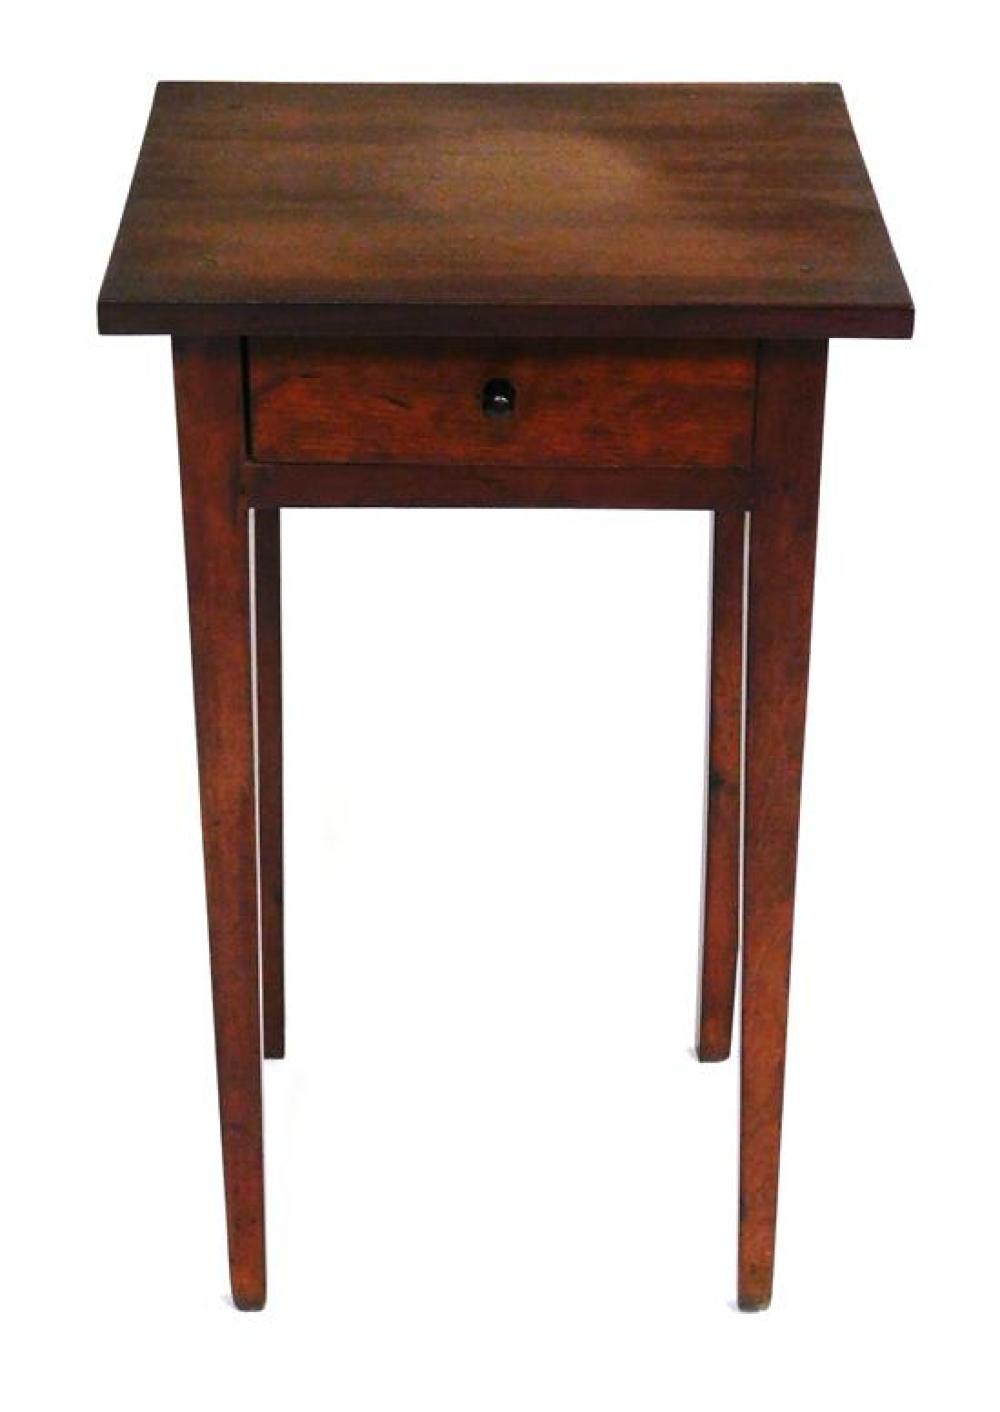 HEPPLEWHITE STYLE STAND, LATE 19TH/